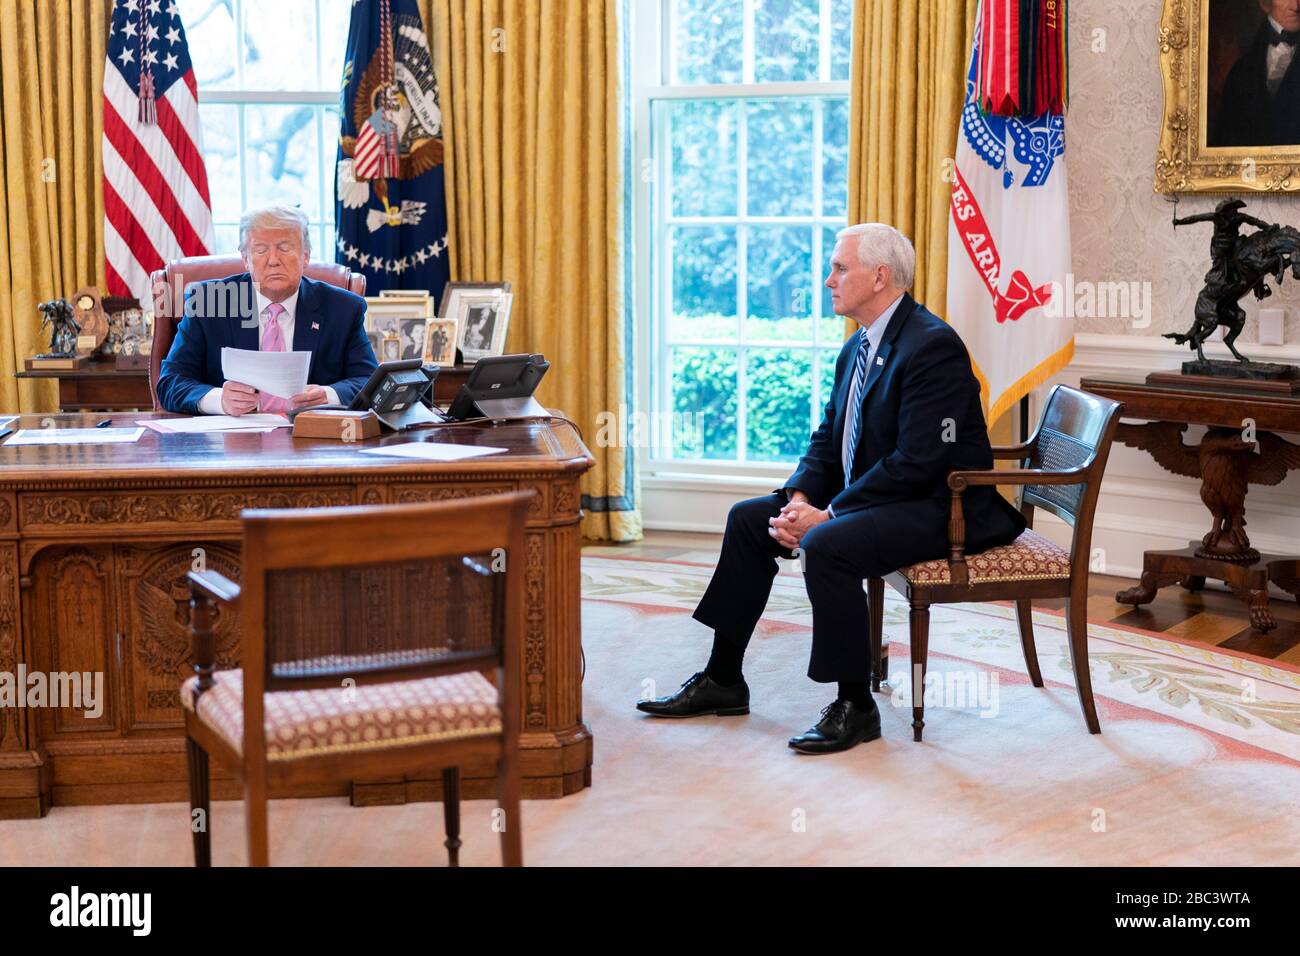 Washington, United States Of America. 01st Apr, 2020. Washington, United States of America. 01 April, 2020. U.S President Donald Trump and Vice President Mike Pence use the speaker phone to talk with military family members about the COVID-19, coronavirus pandemic from the Oval Office of the White House April 1, 2020 in Washington, DC. Credit: Tia Dufour/White House Photo/Alamy Live News Stock Photo